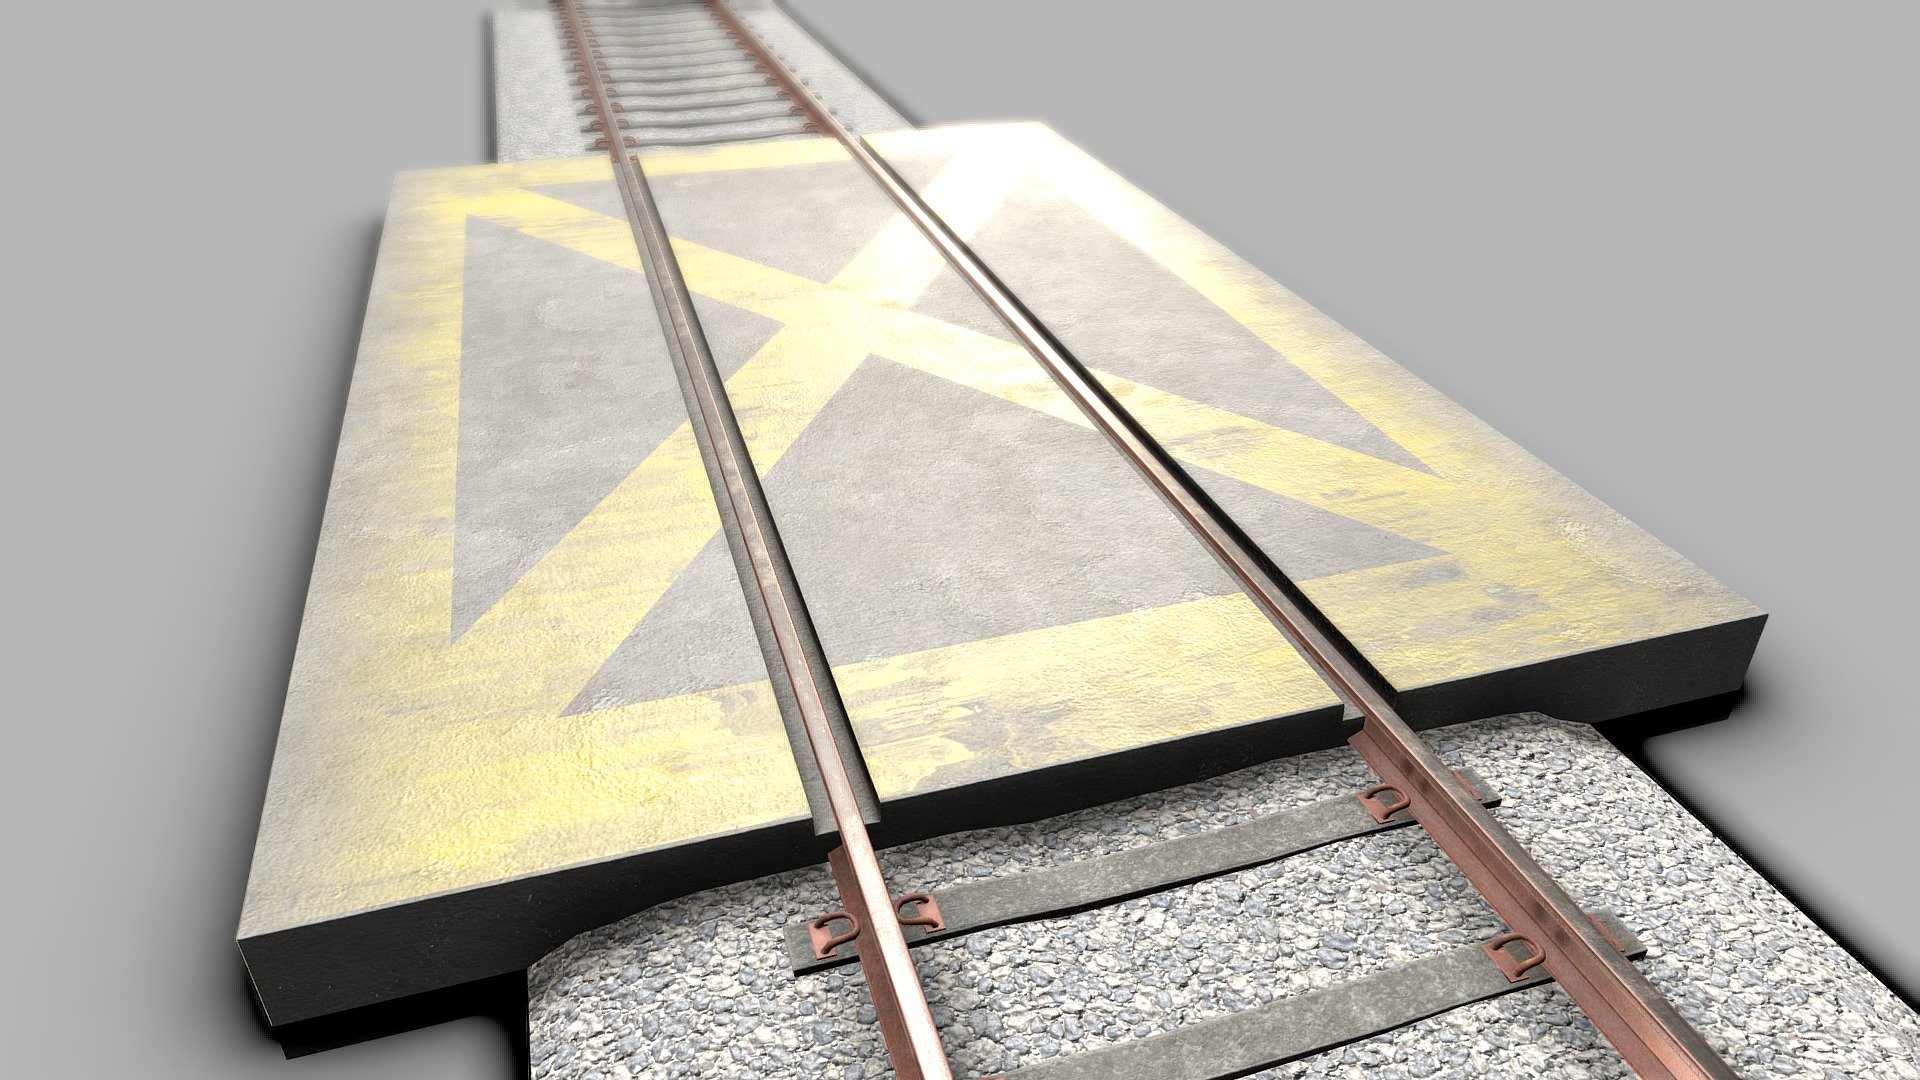 Railway Crossing made for a Railway project in Unreal Engine 4, for RoyalHaskoningDHV.




My socials!

🐦 Twitter

🎥 YouTube
 - Railway Crossing - 3D model by Suggo (@SuggoCreations) 3d model